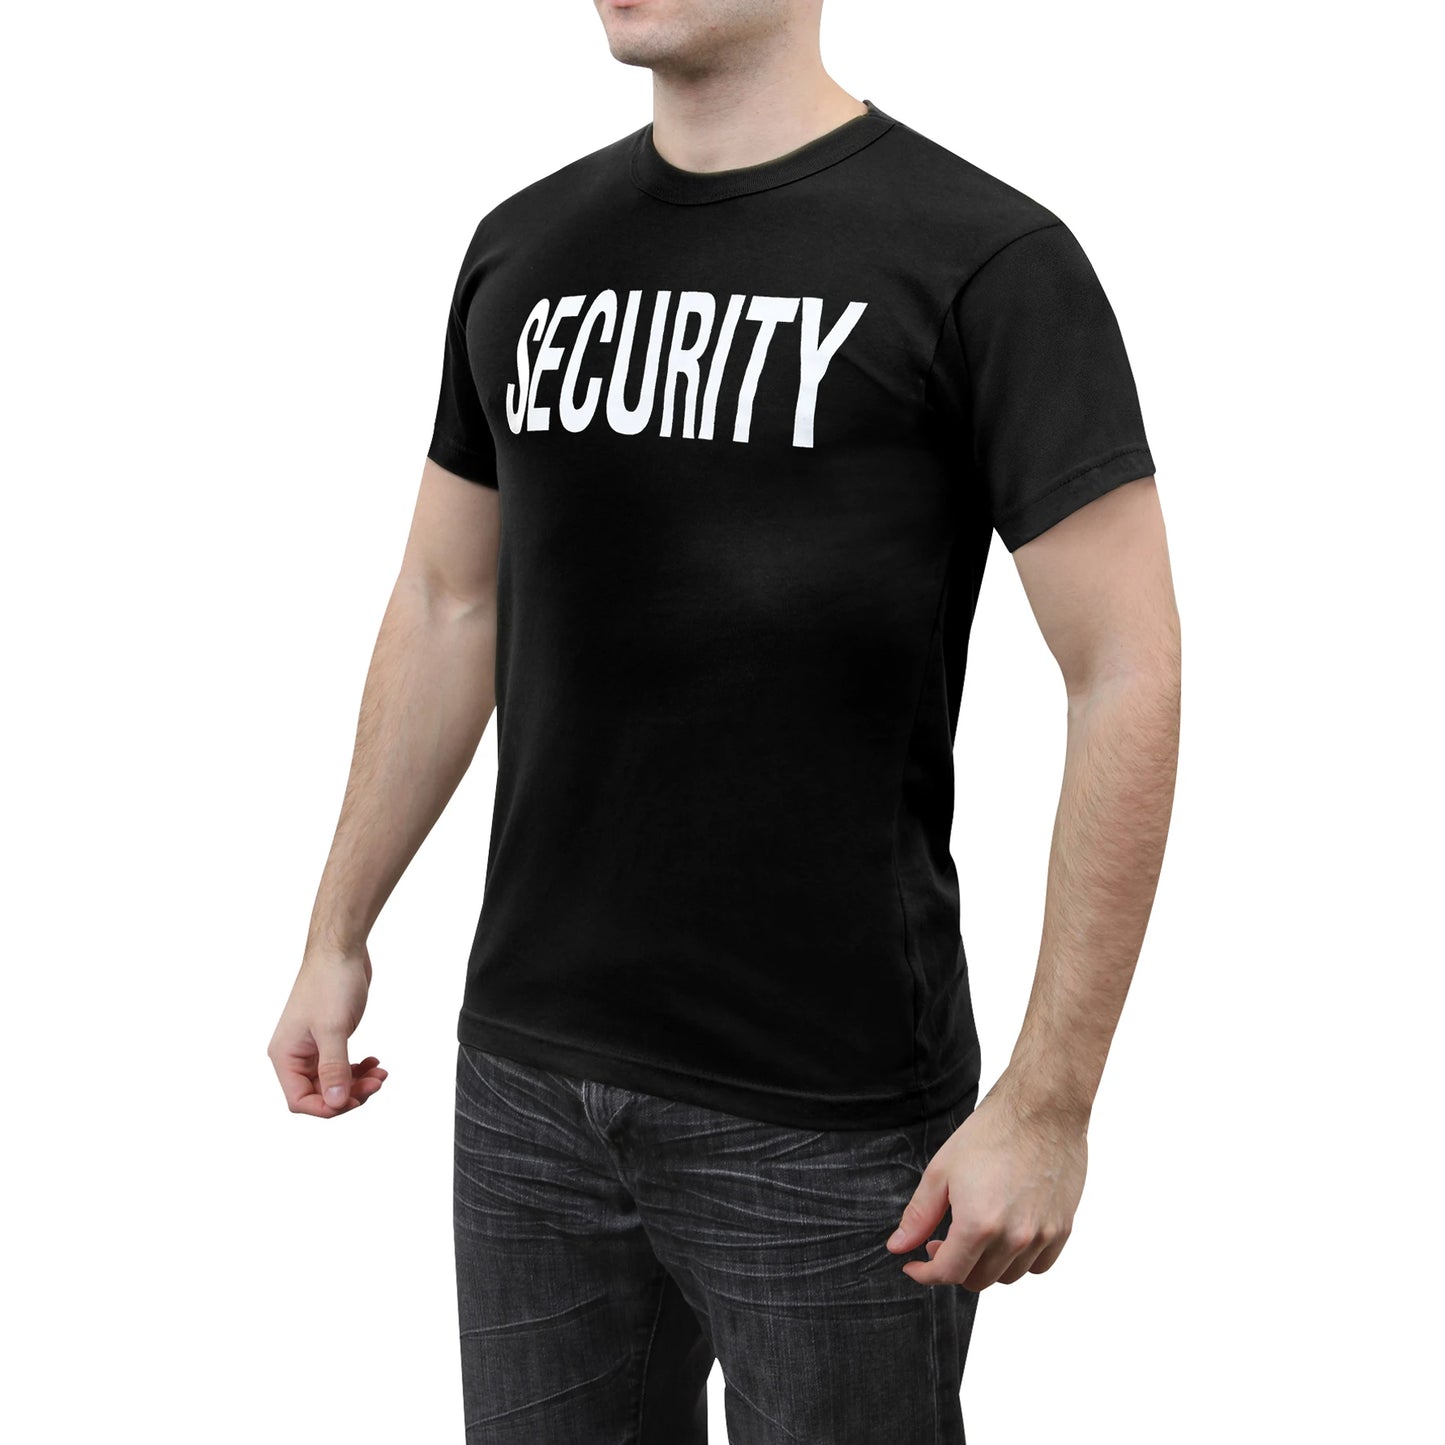 Security - Two-Sided T-Shirt